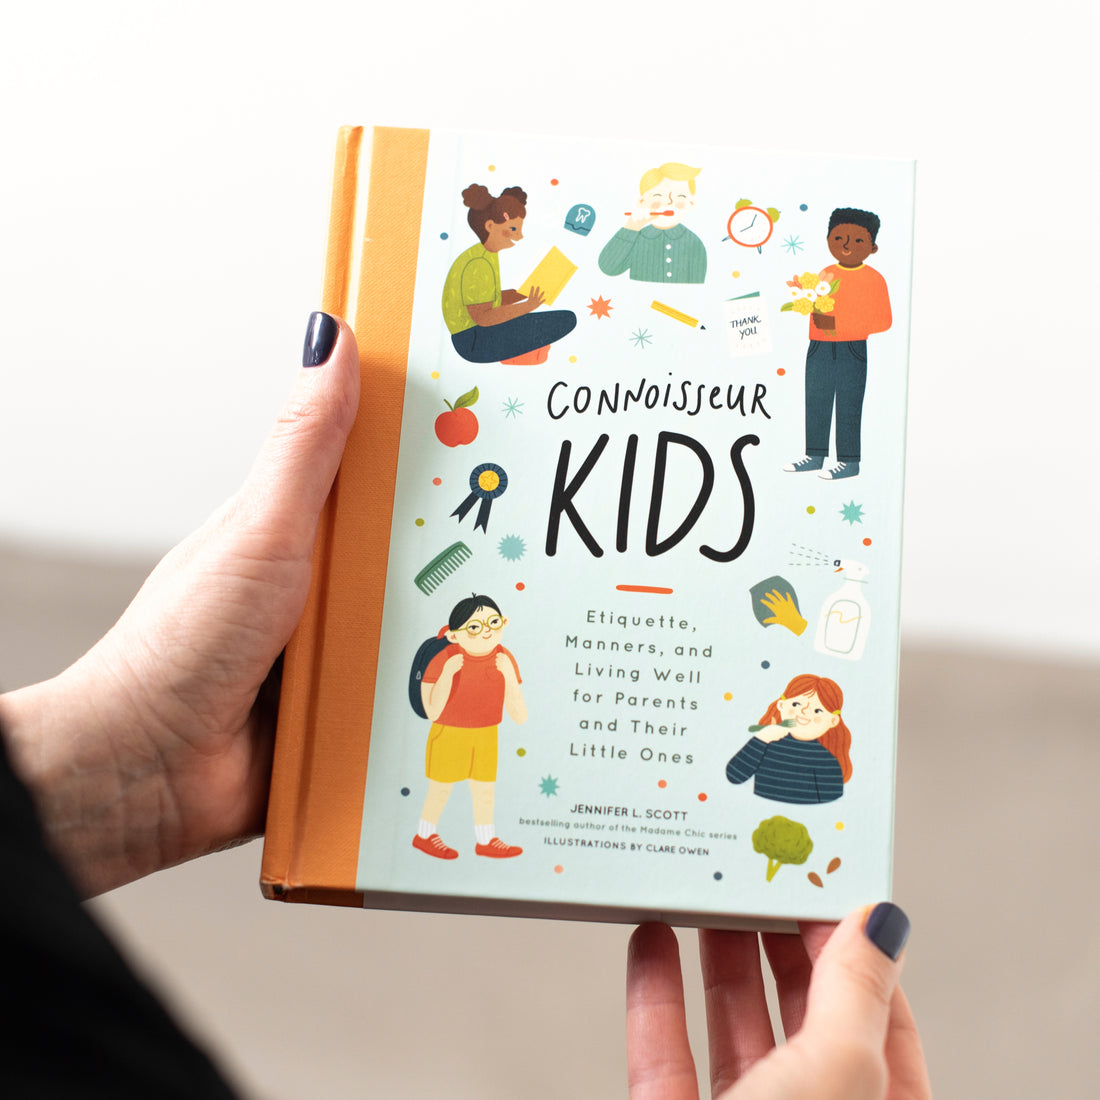 Connoisseur Kids: Etiquette, Manners, and Living Well for Parents and their Little Ones